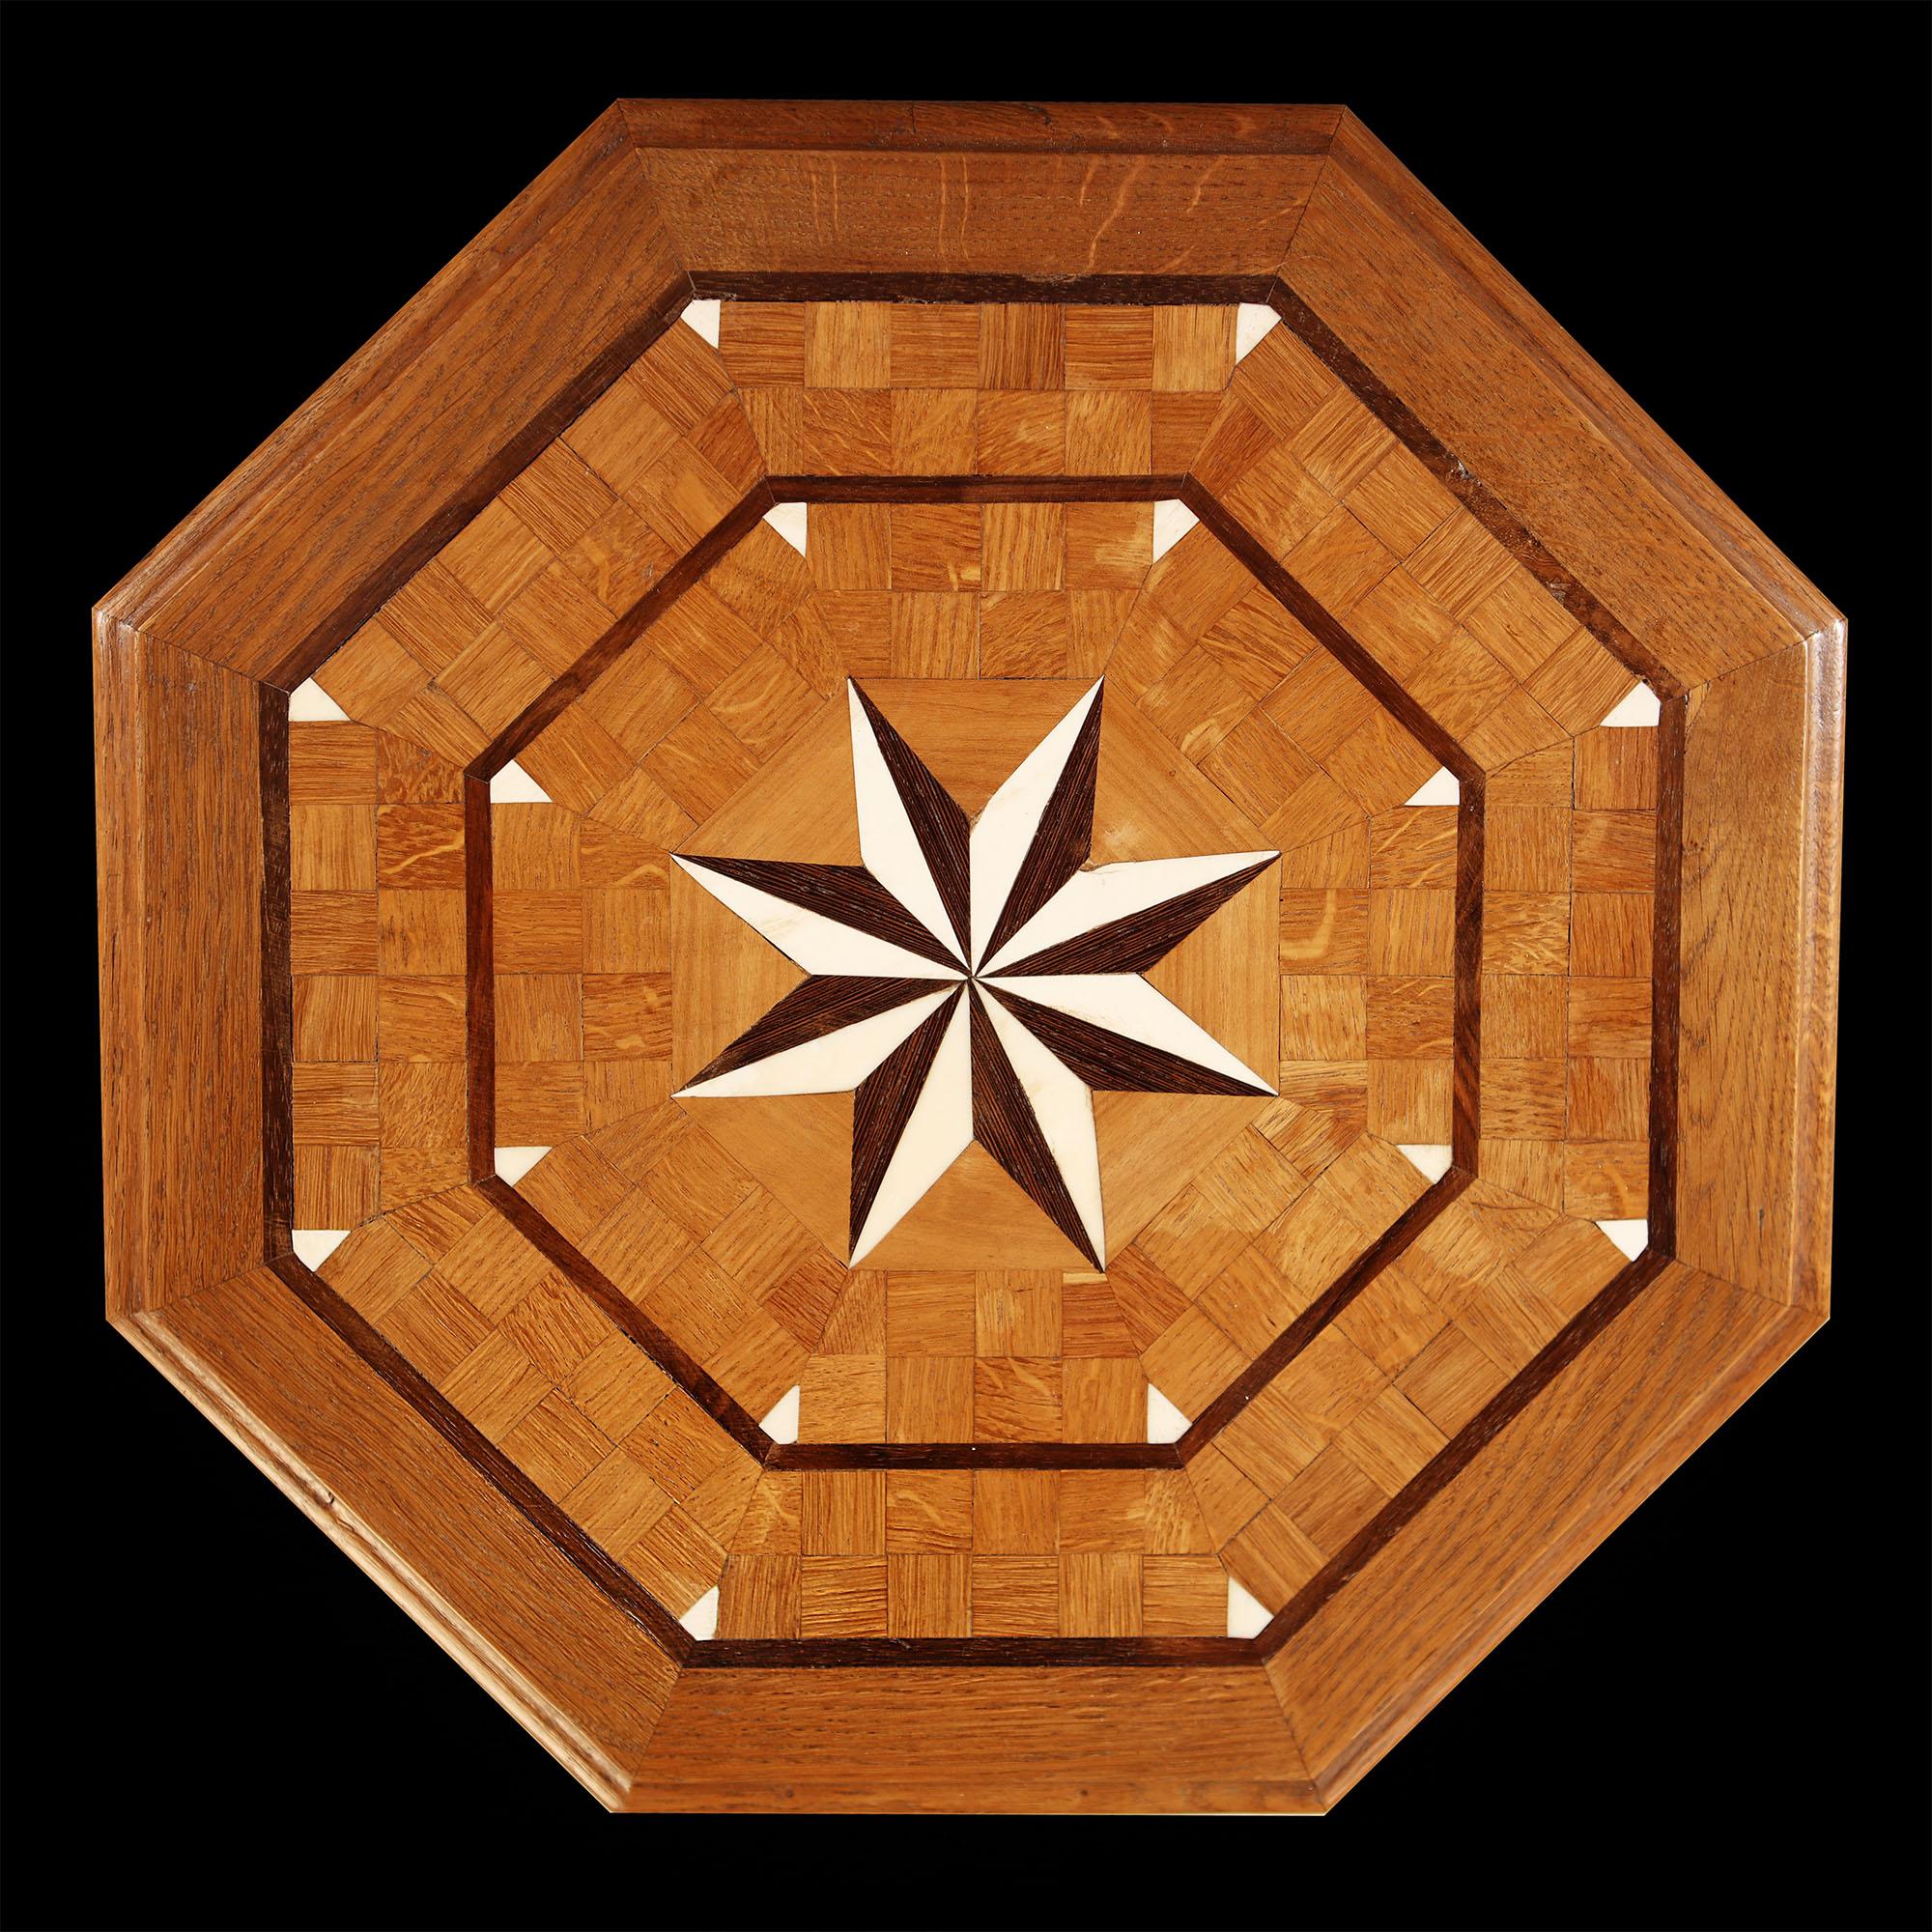 Inlay Early 20th Century English Hexagonal Oak Wood Inlaid Occasional Table